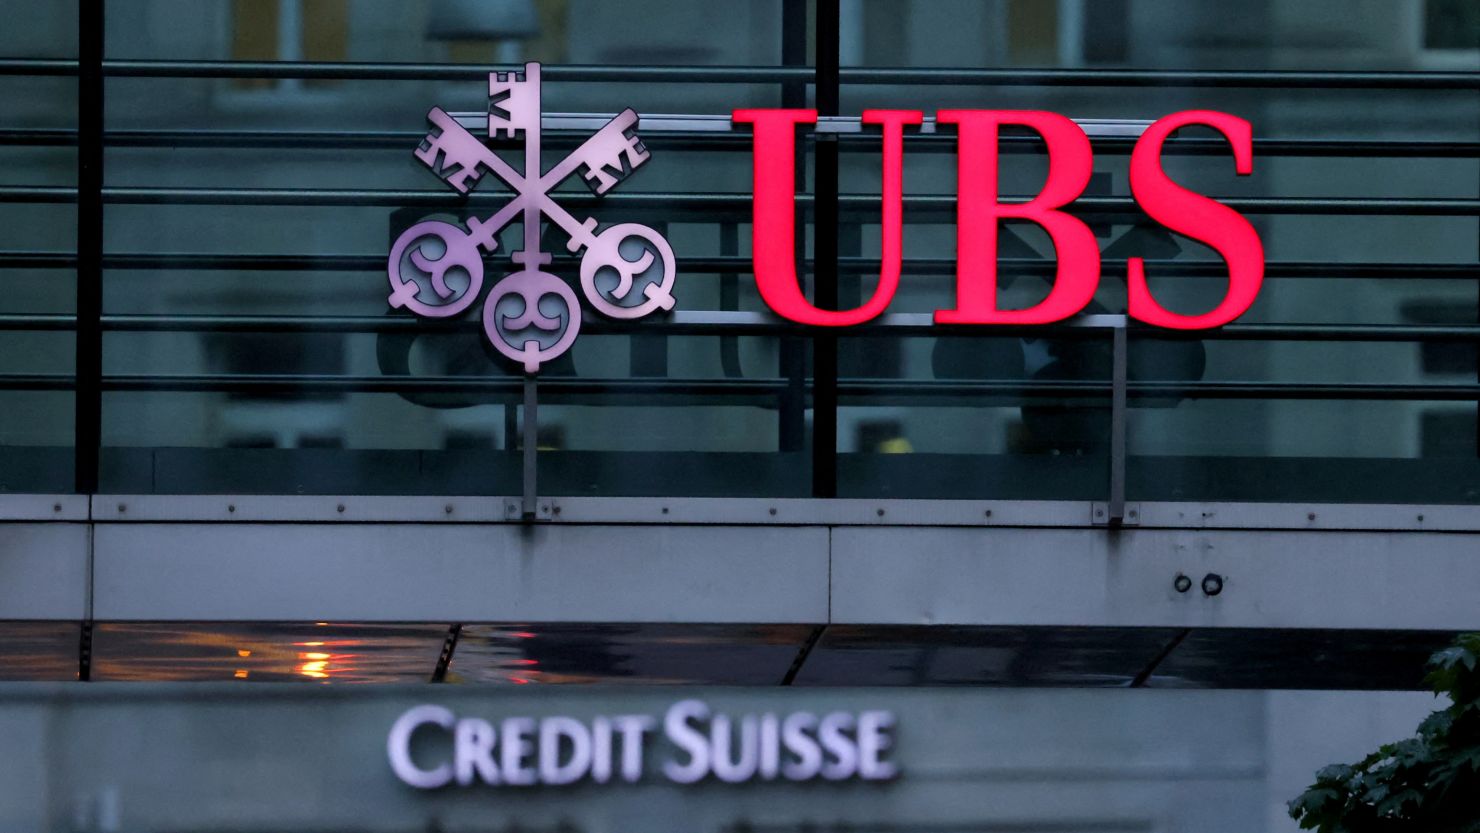 Shares of UBS are up about 20% since it bought Credit Suisse in a hastily-arranged rescue.